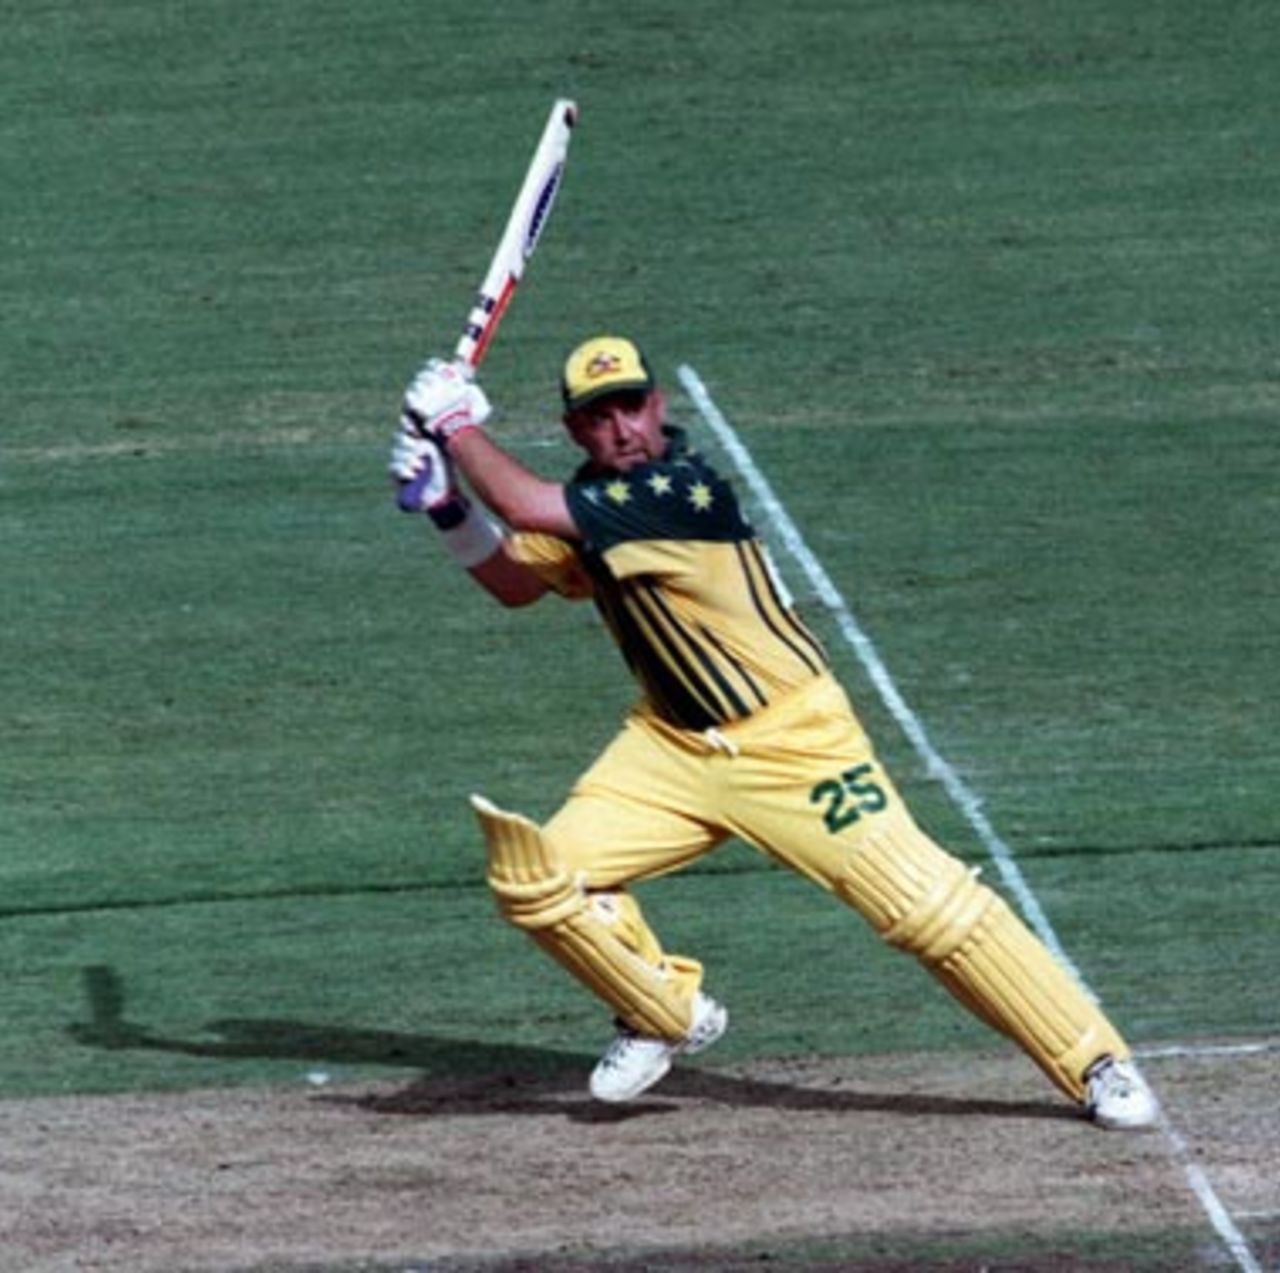 Darren Lehmann on the front foot and cutting for four.....Australia v New Zealand ODI at the Sydney Cricket Ground, Wednesday January 14th 1998.